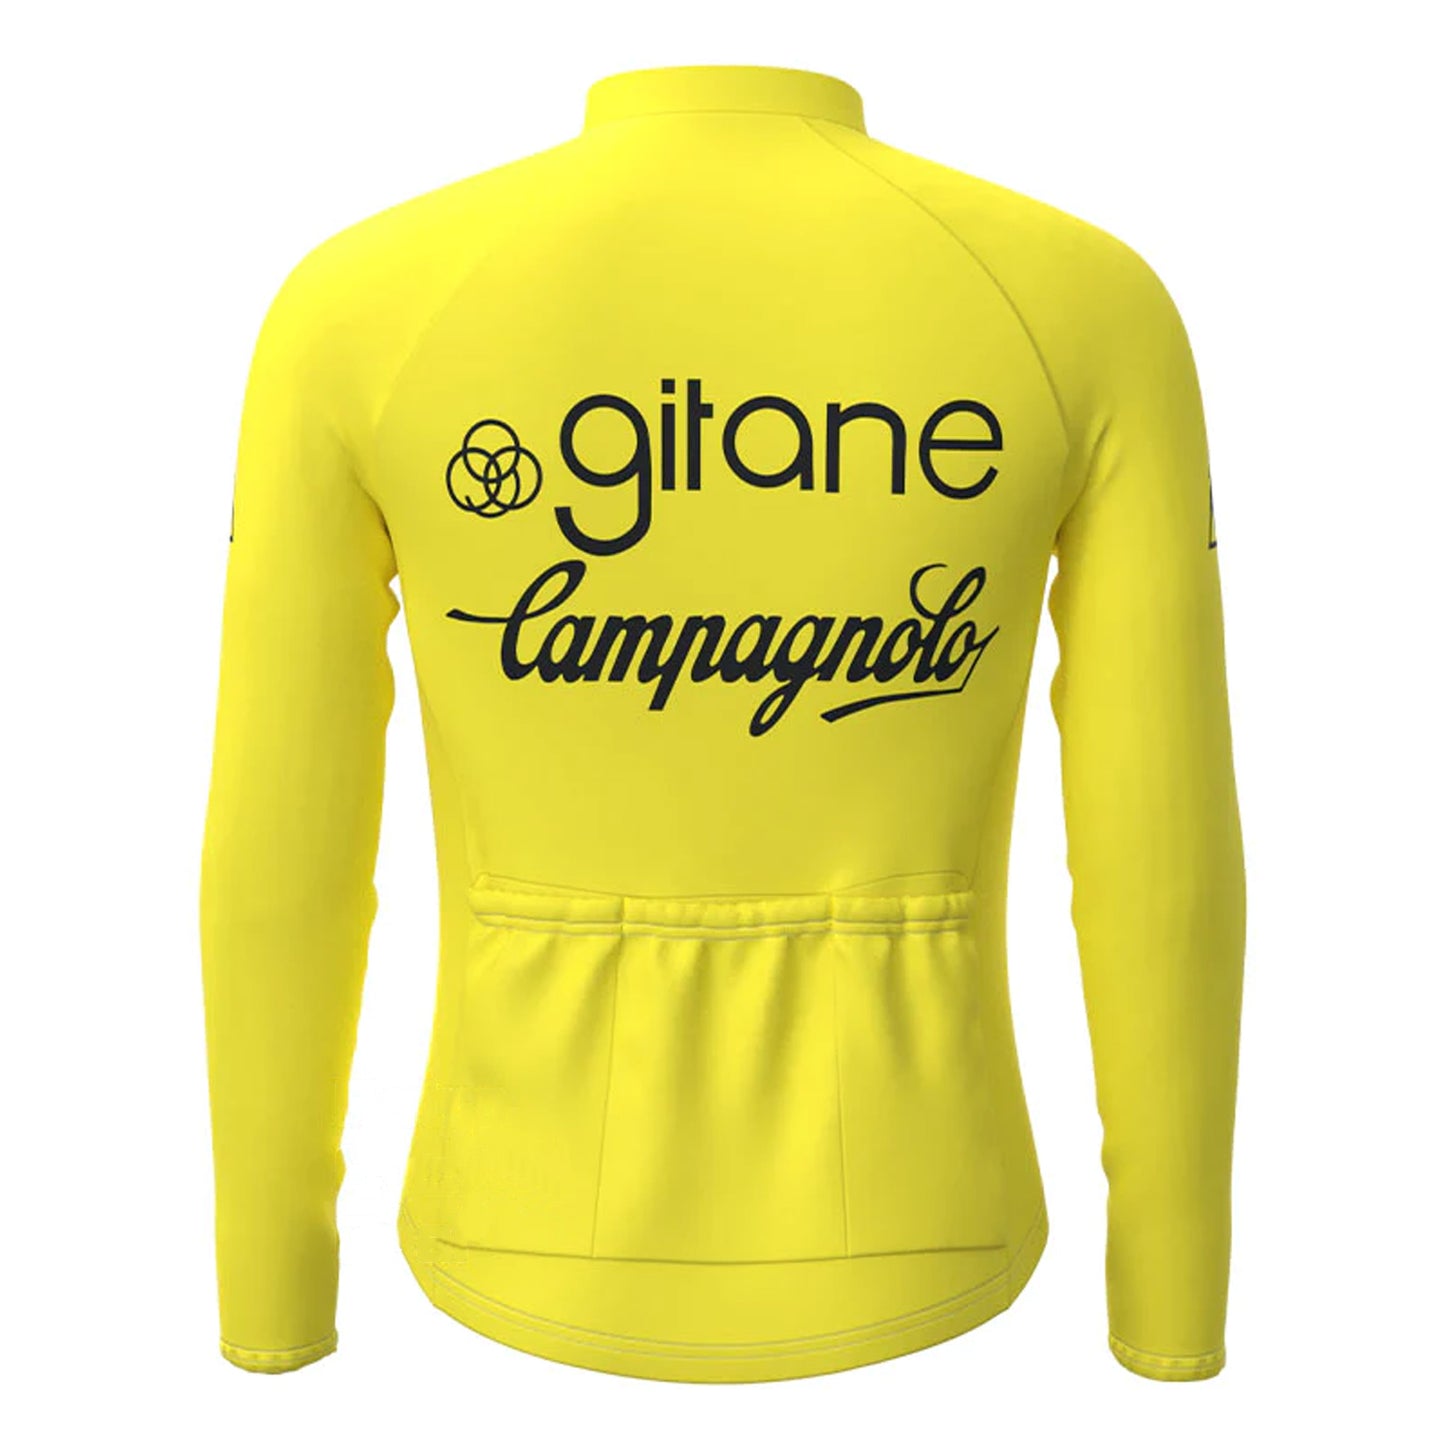 Miko Gitane Campagnolo Yellow Vintage Long Sleeve Cycling Jersey Top